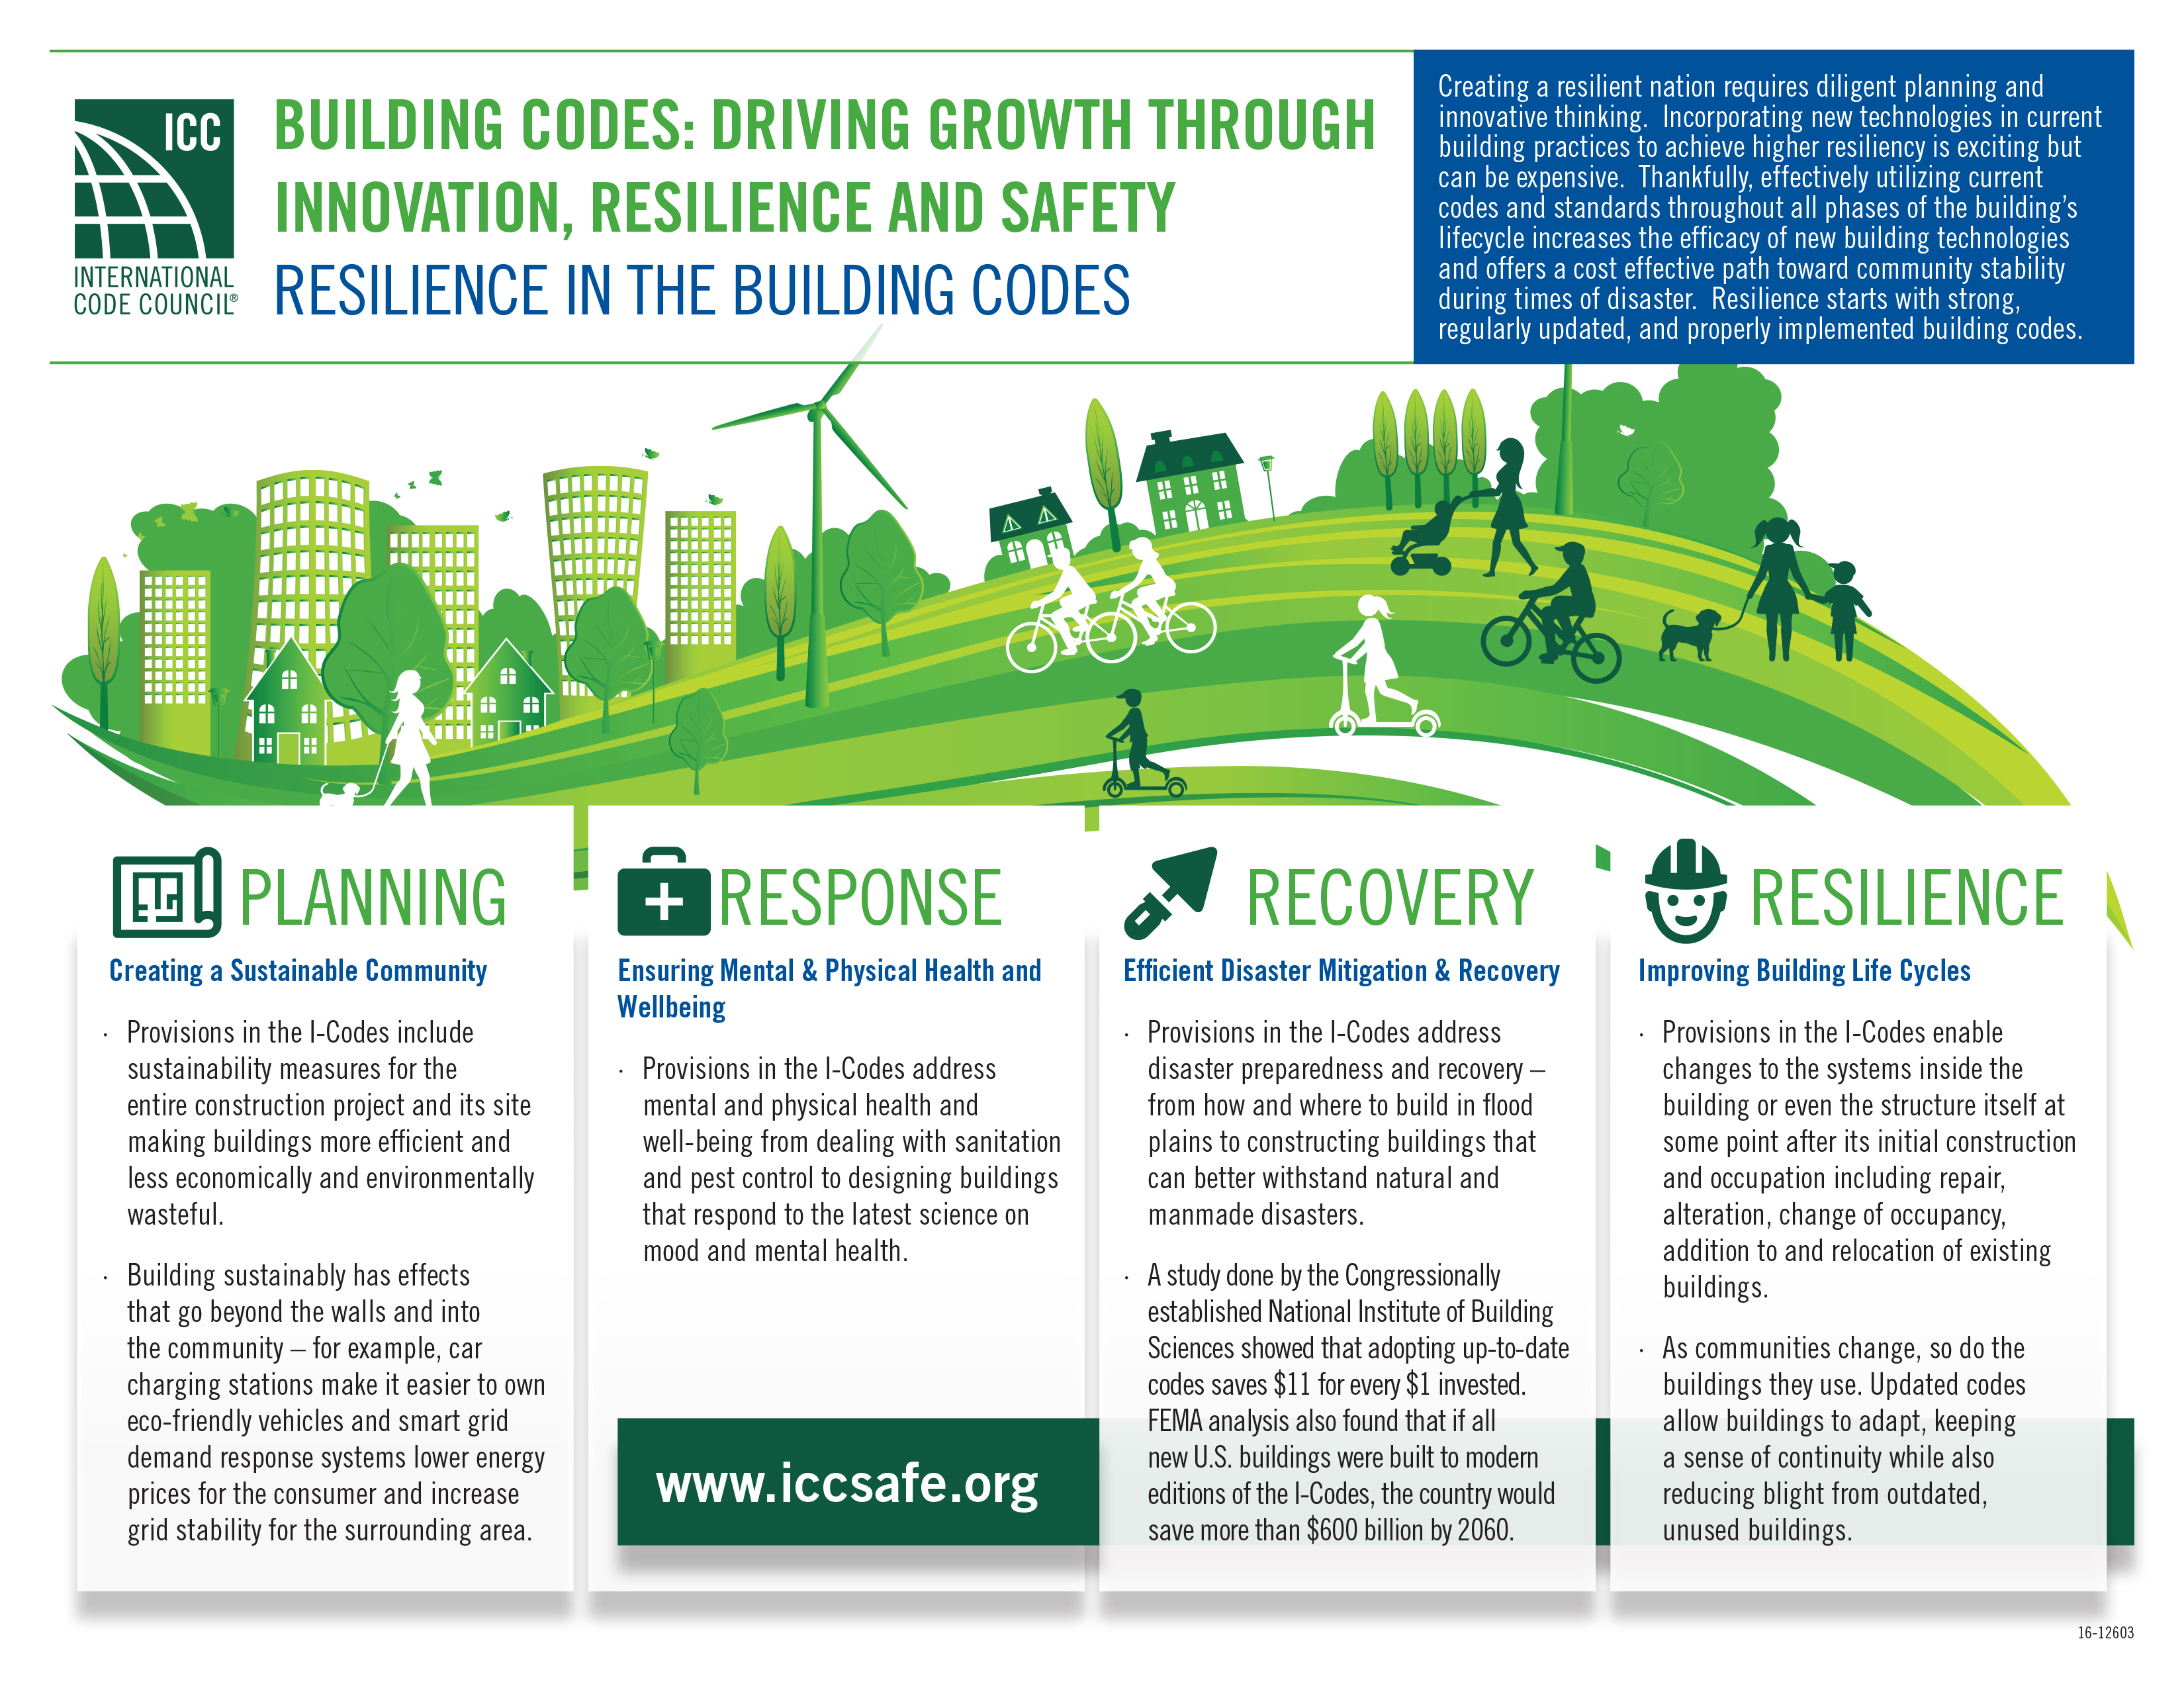 3 High-Rise Building Strategies to Improve Resilience - Facilities  Management Insights